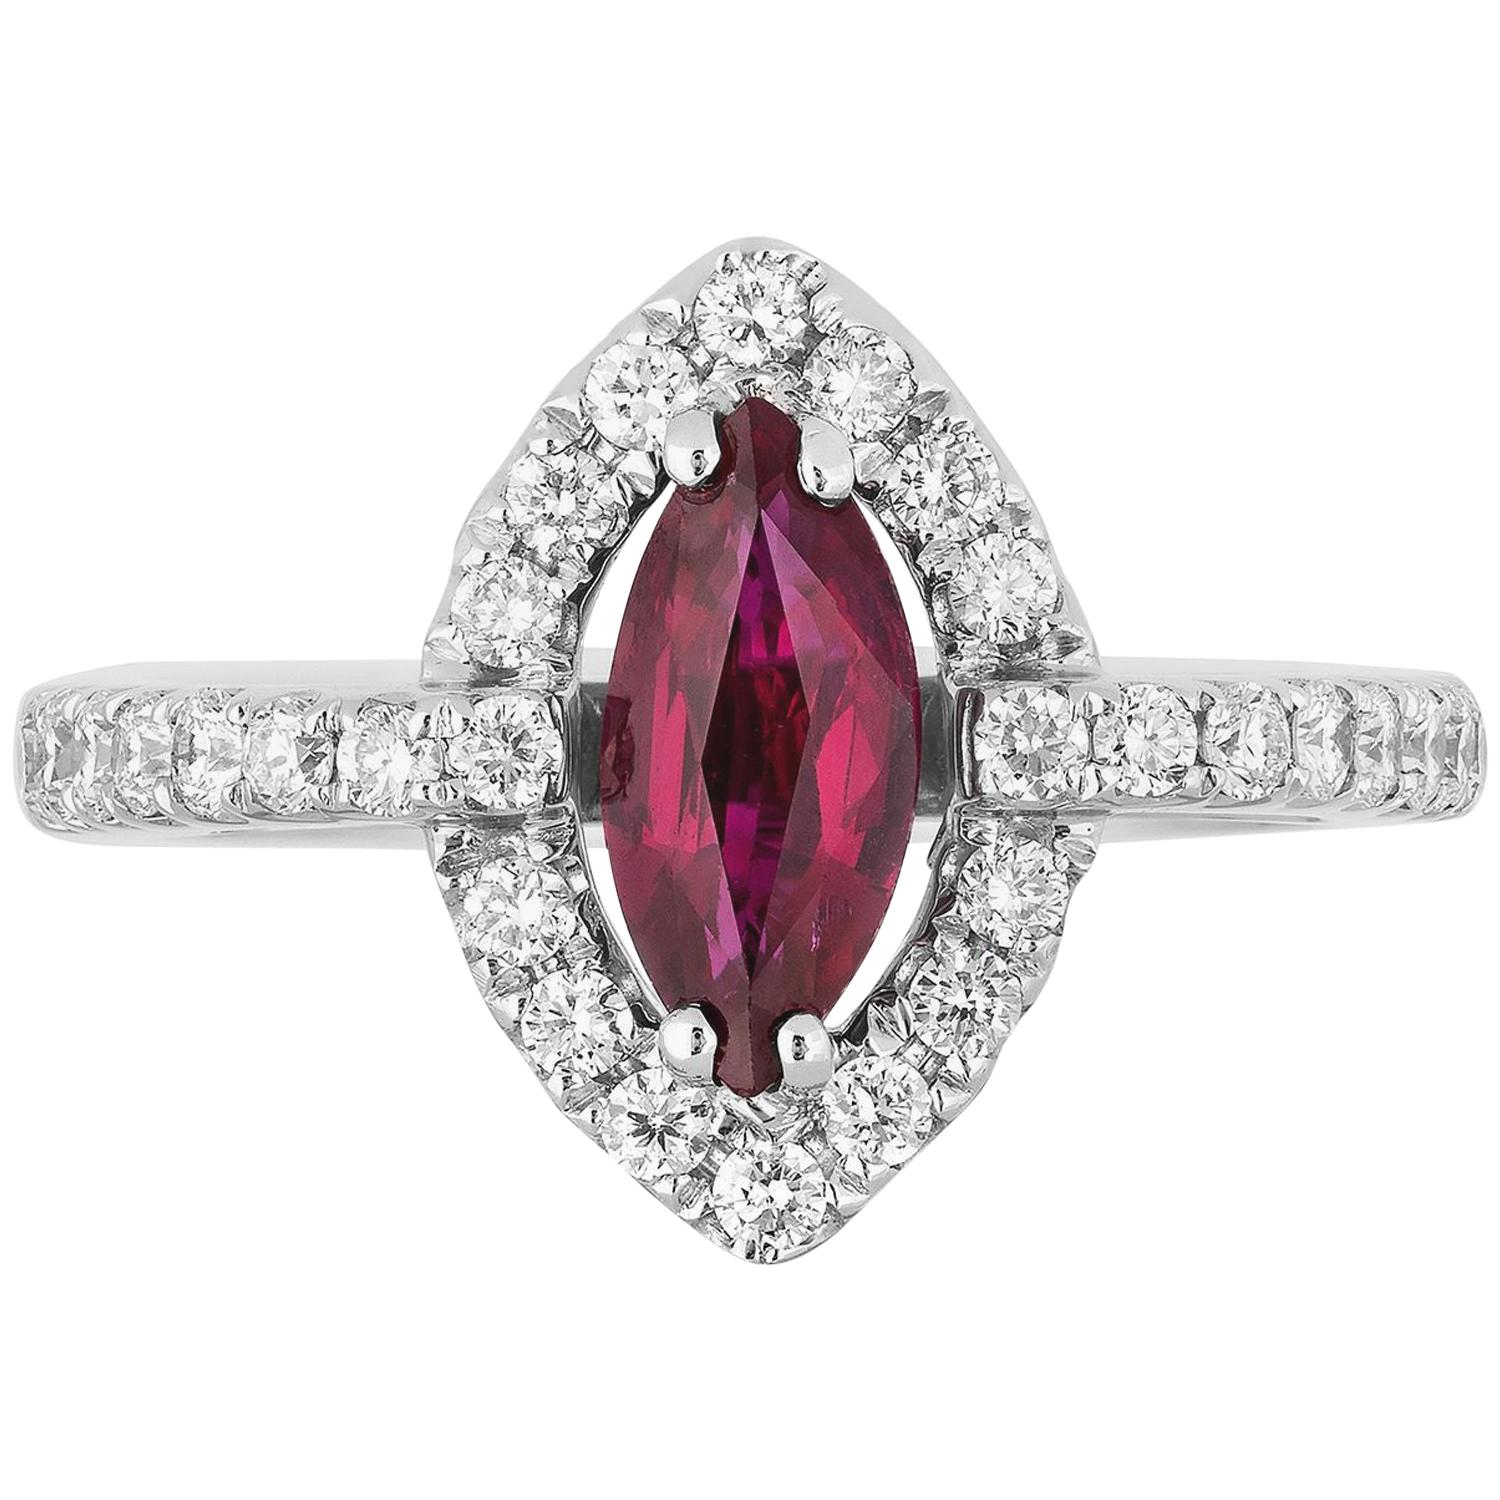 GIA Certified Natural No Heat 1.01 Carat Ruby Diamond Cocktail Ring For Sale